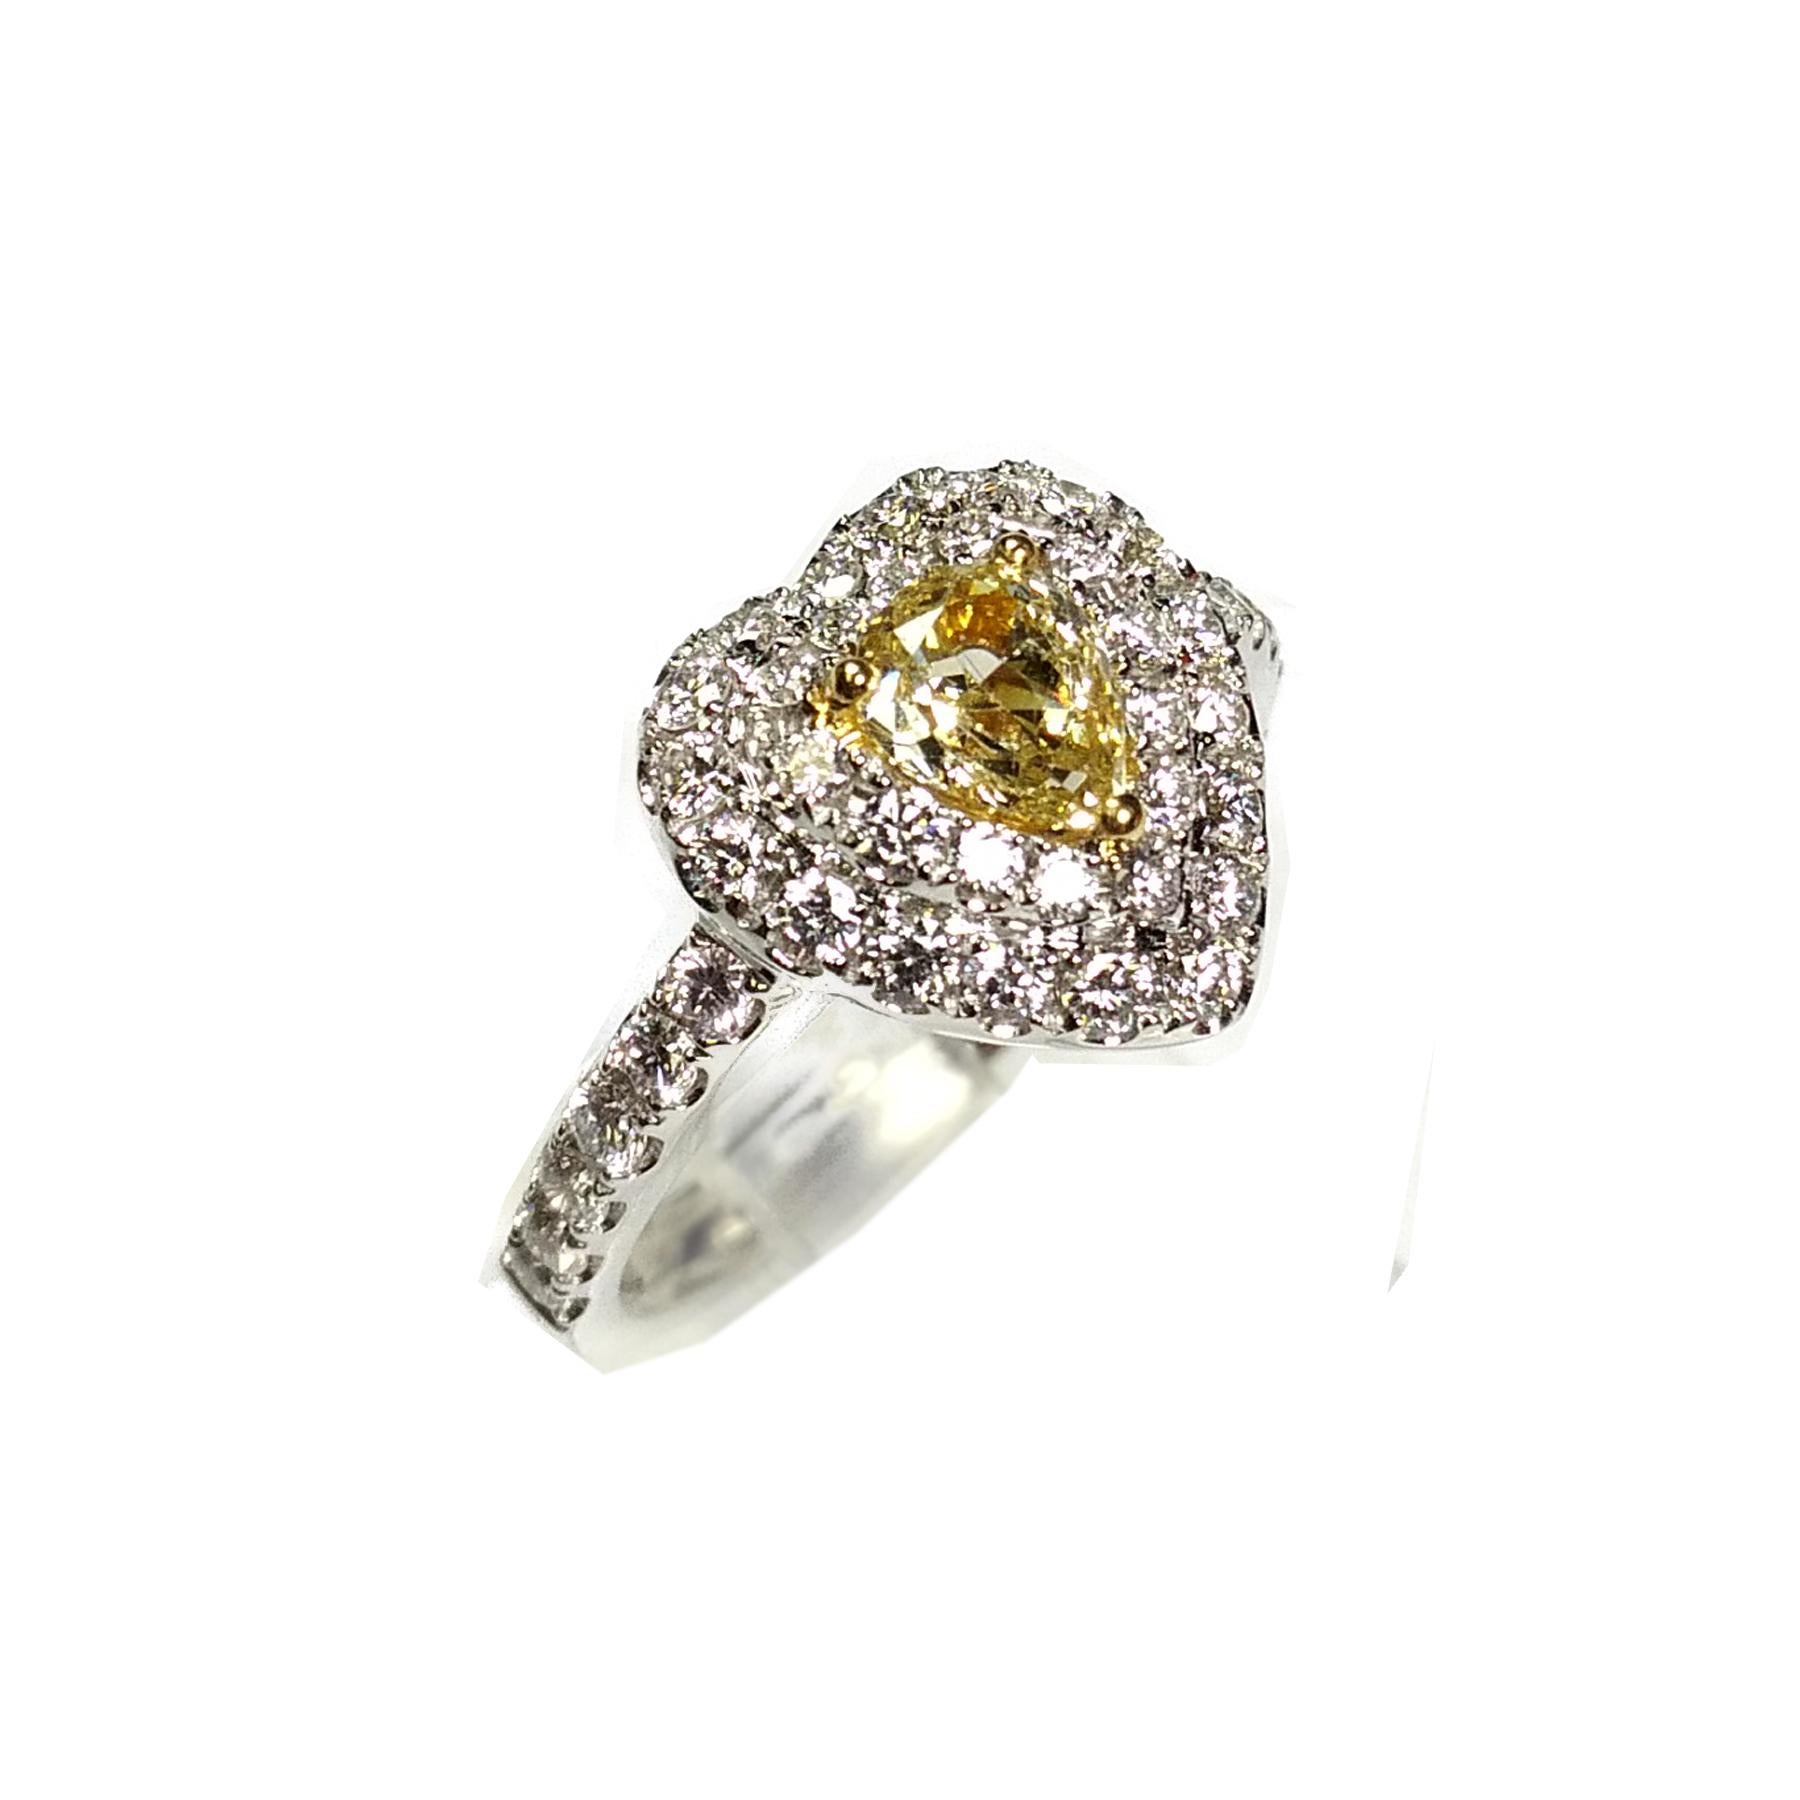 Fancy yellow 0.57 carat diamond ring. Natural fancy yellow pear brilliant cut diamond, set in high profile basket mount with 3 yellow gold bead prongs. Handcrafted heart shape design in round brilliant cut diamonds, accented with diamond shank.